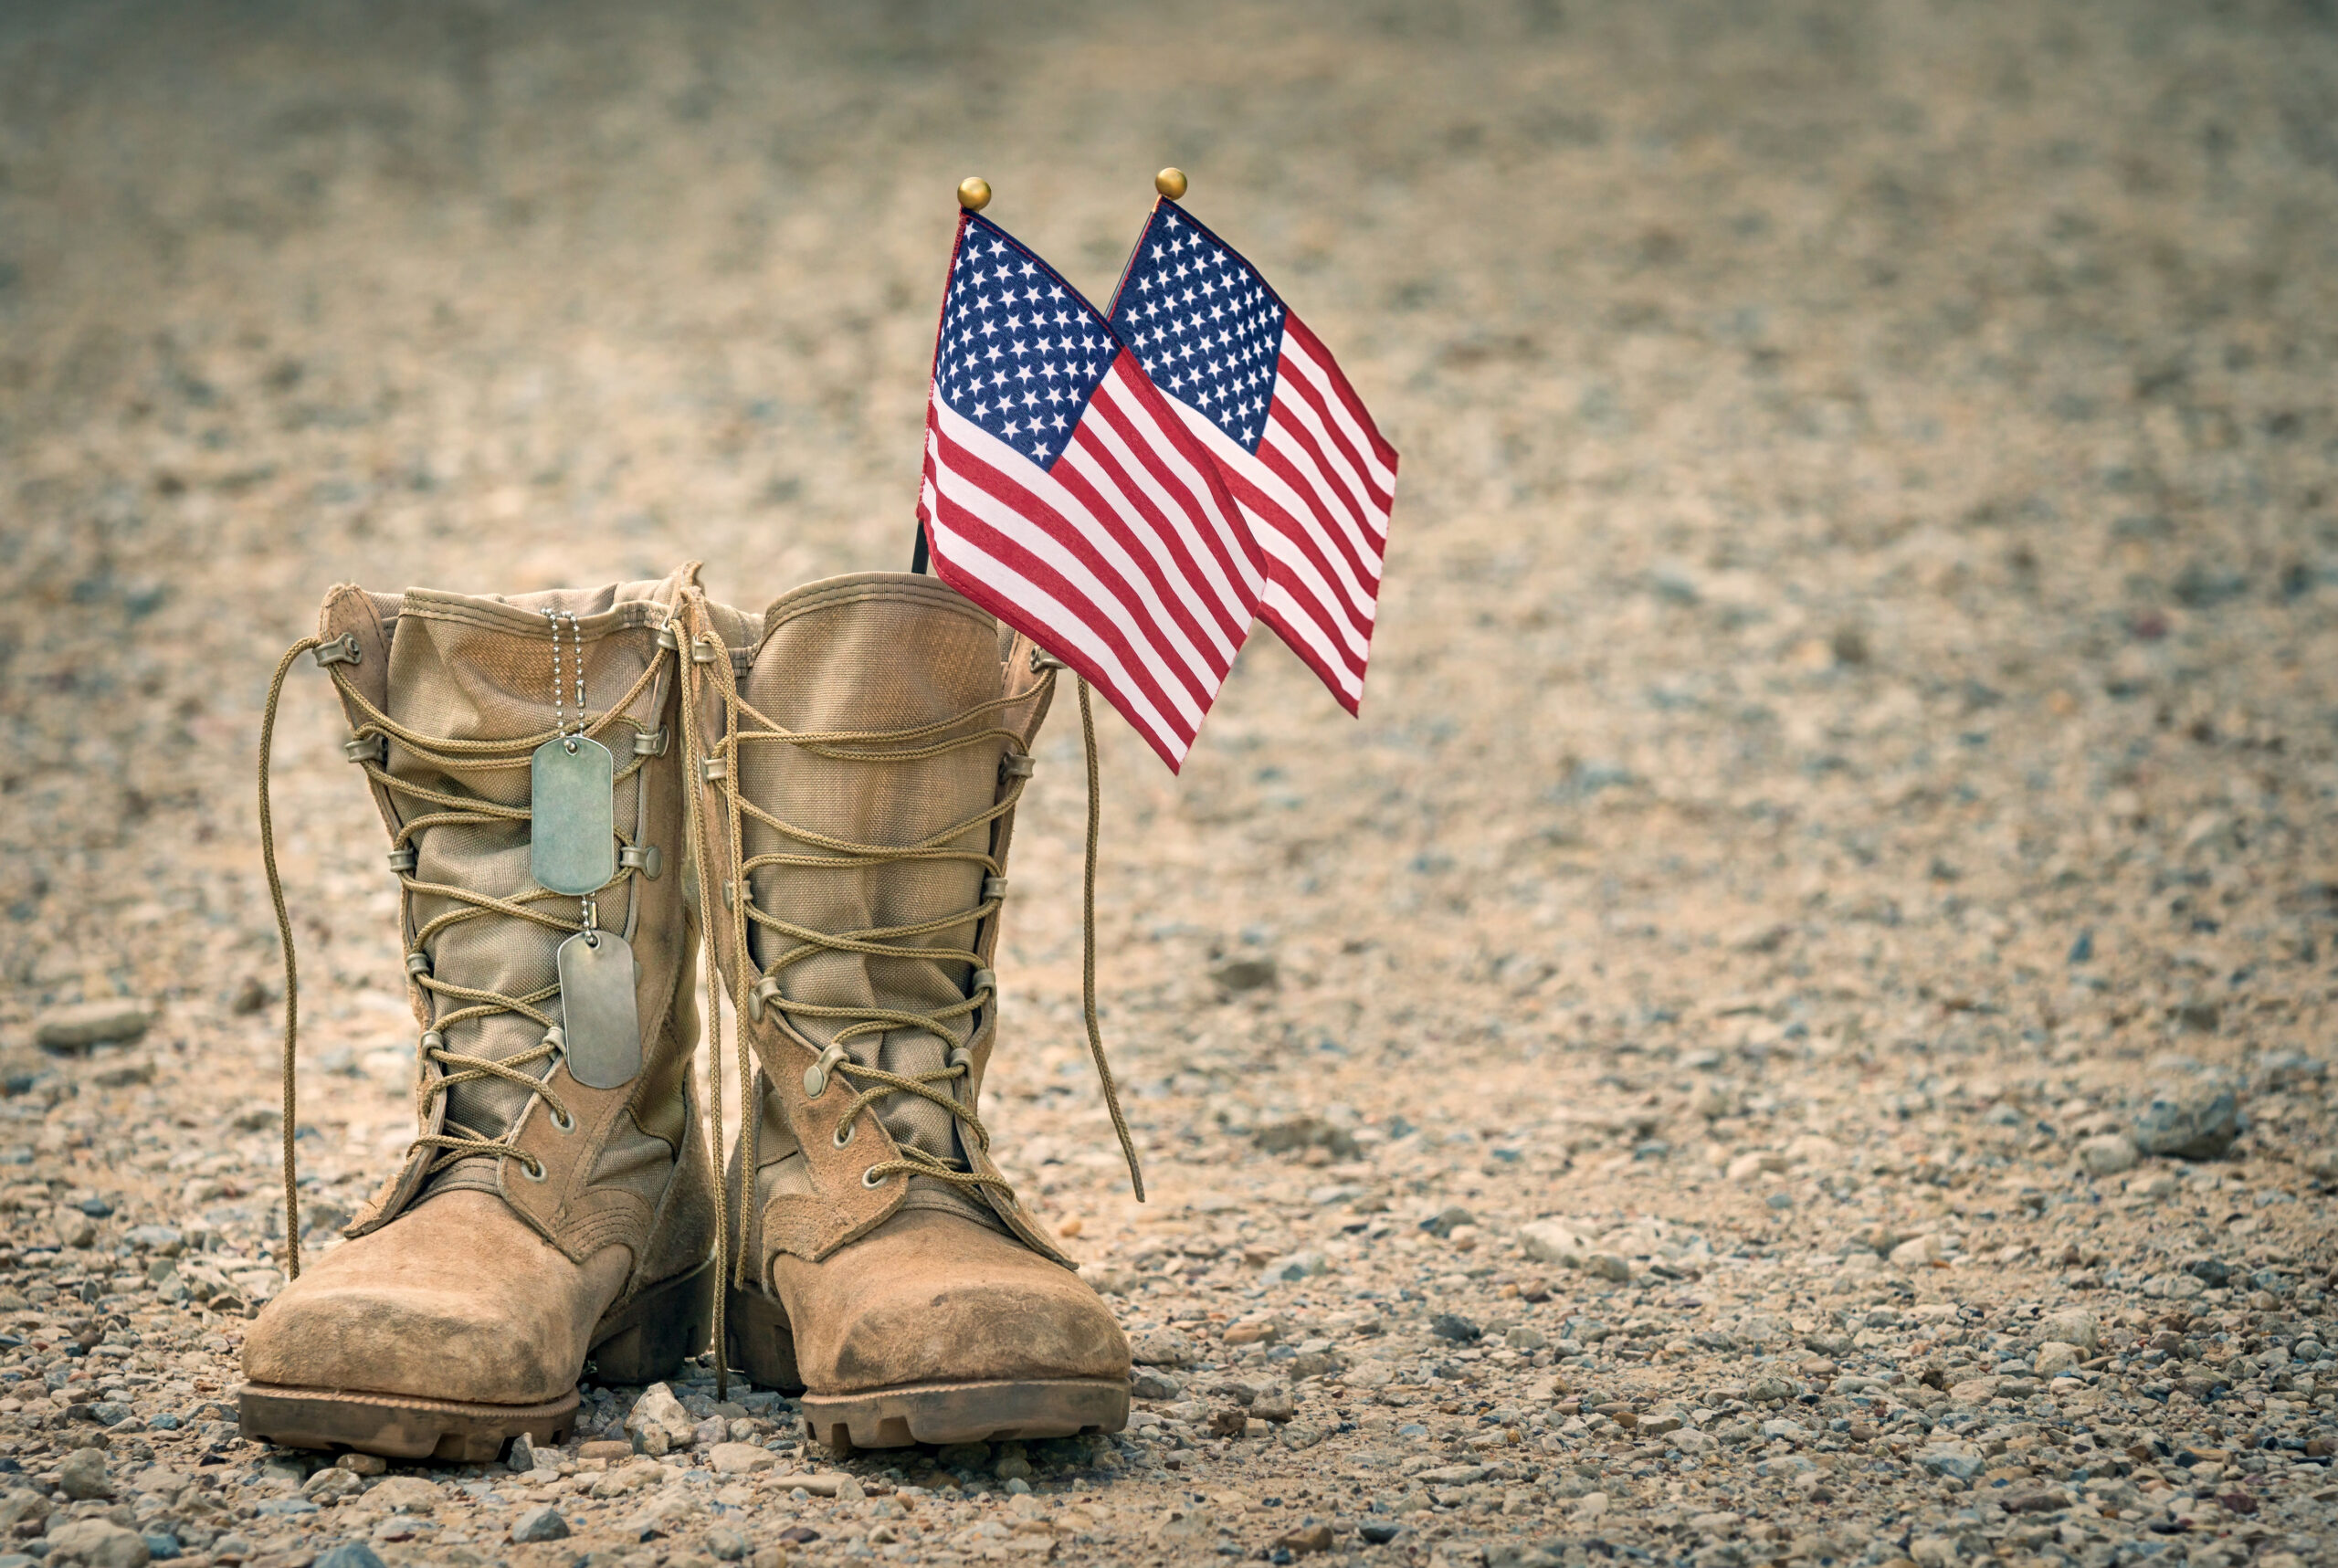 Old military combat boots with dog tags and two small American flags